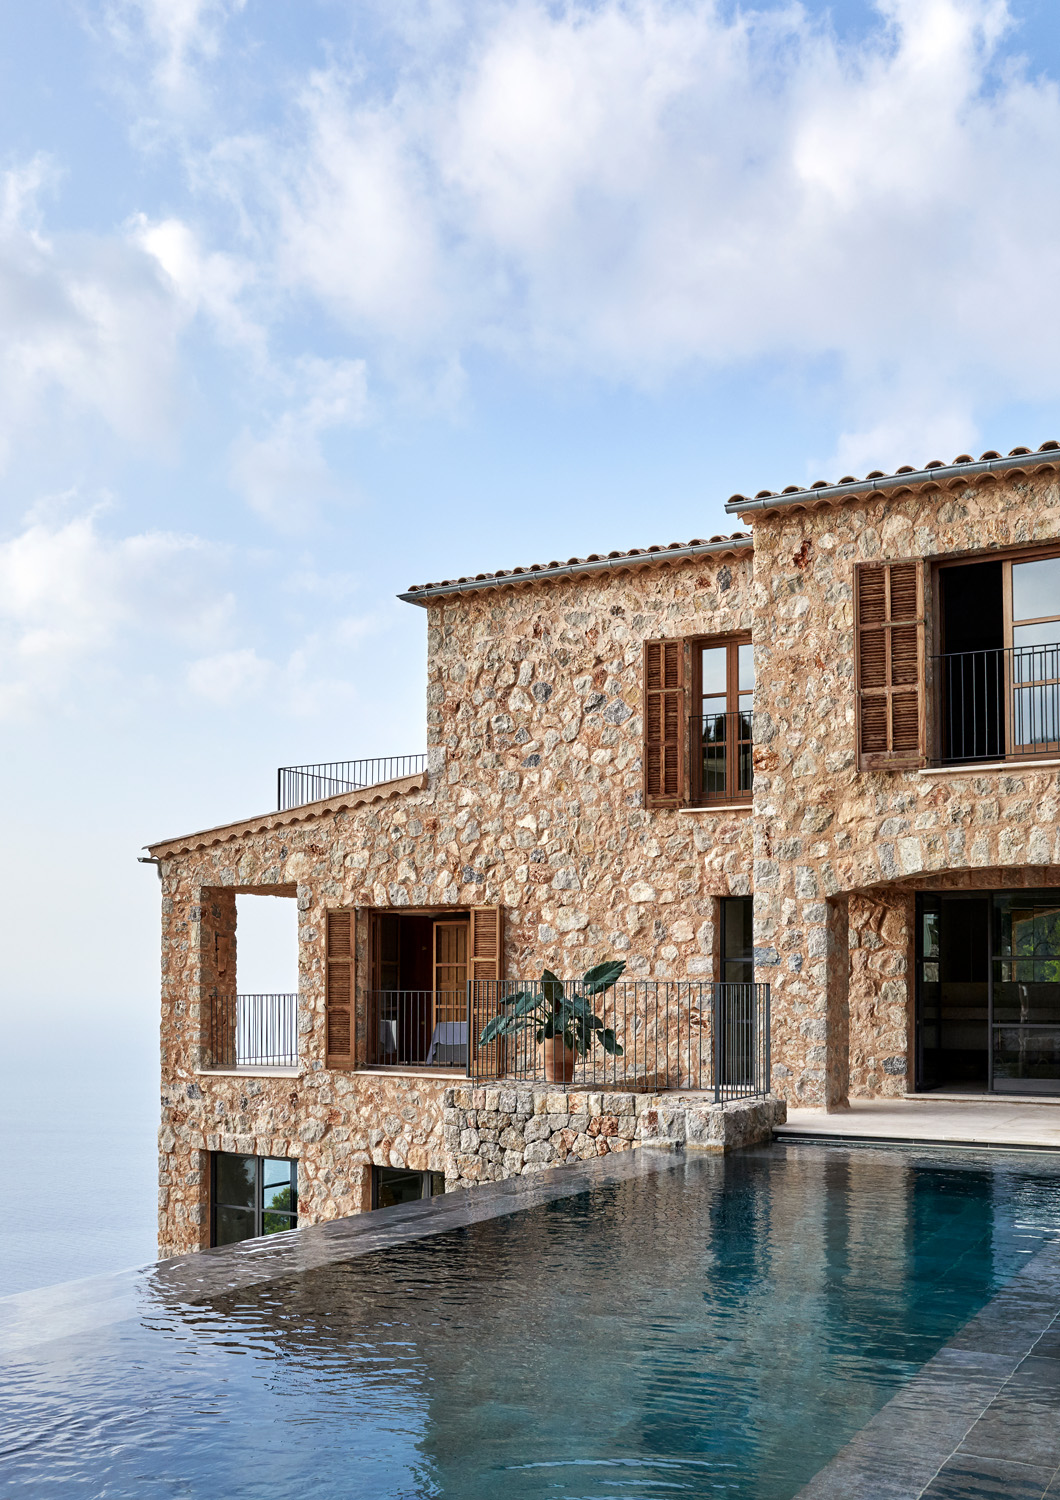 Pool and house Miramar Moredesign - luxury architecture and design in Ibiza